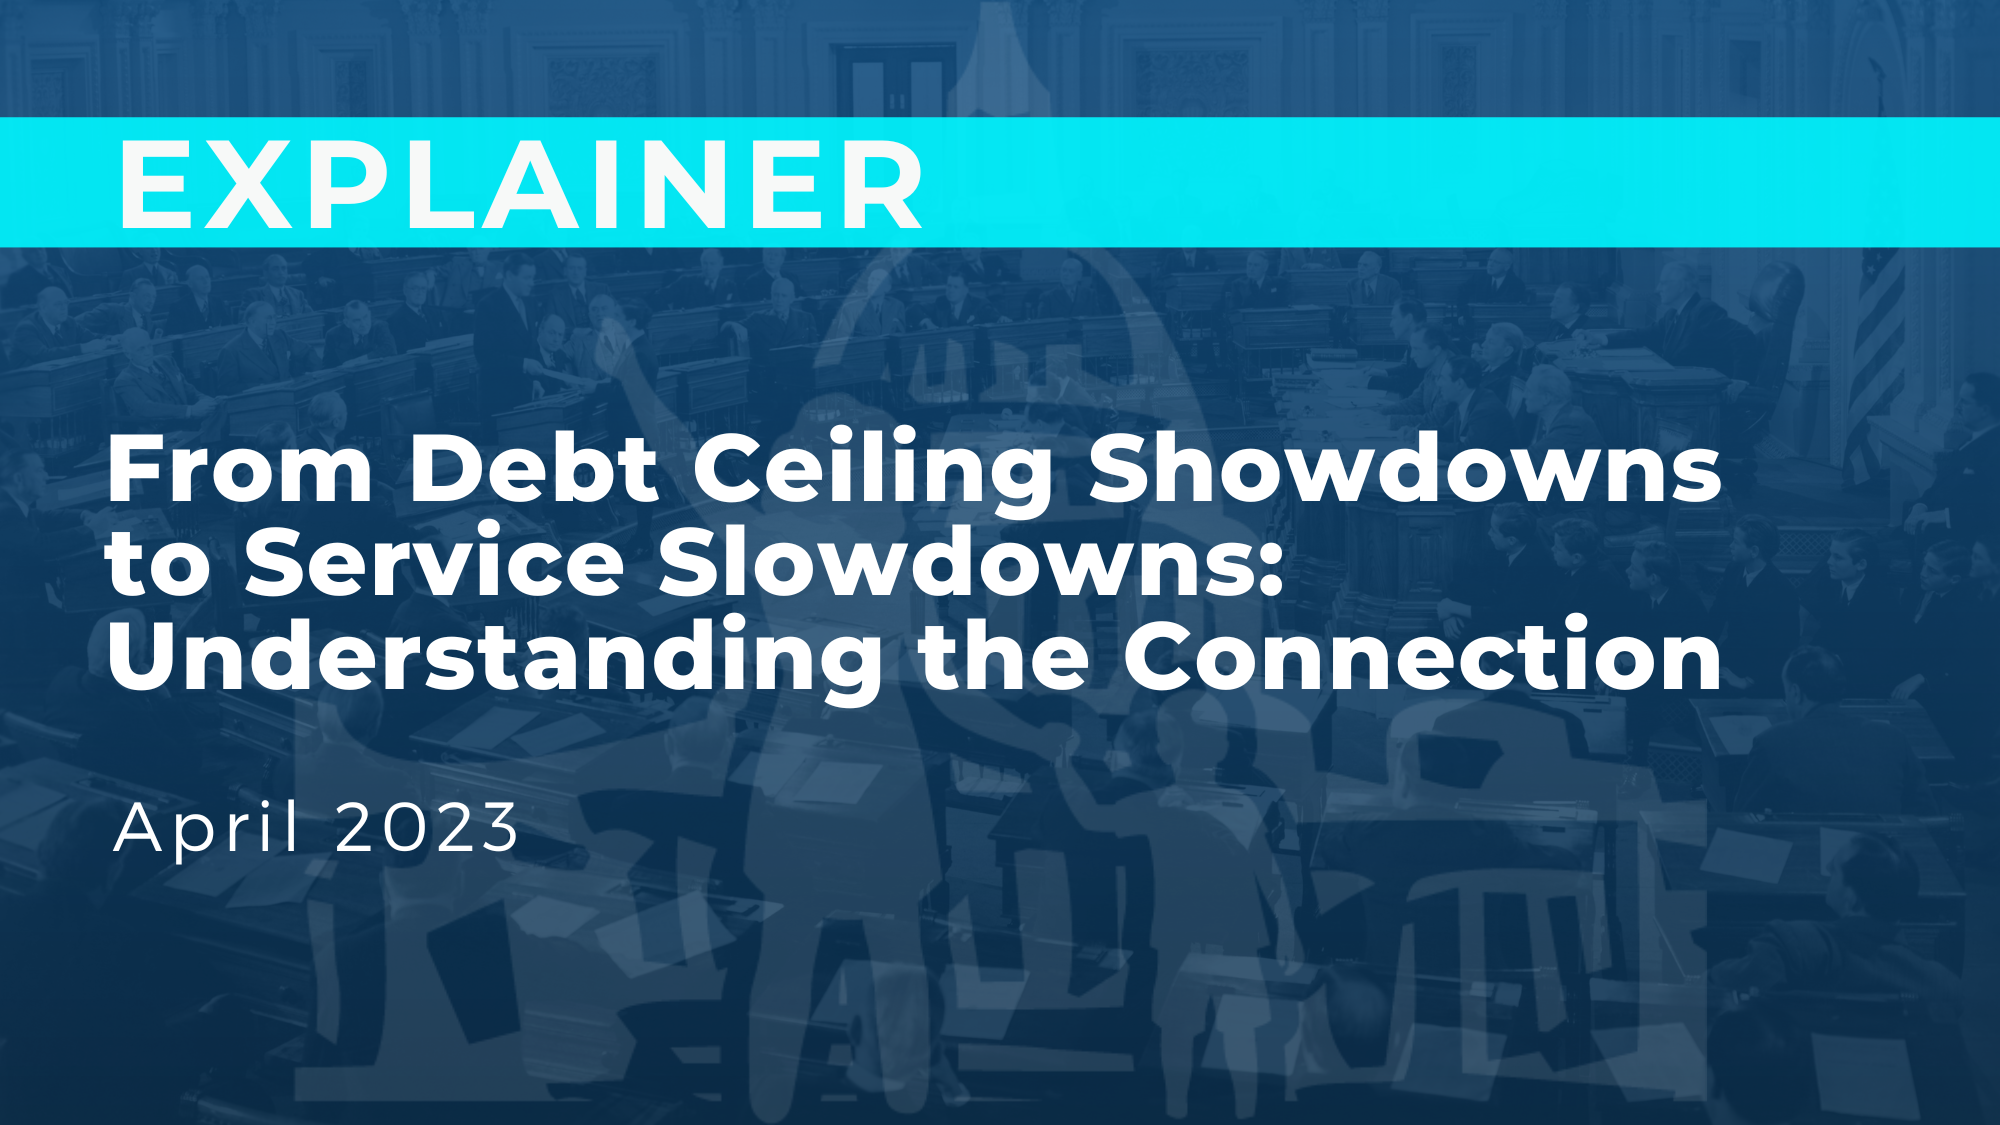 From Debt Ceiling Showdowns to Service Slowdowns: Understanding the Connection